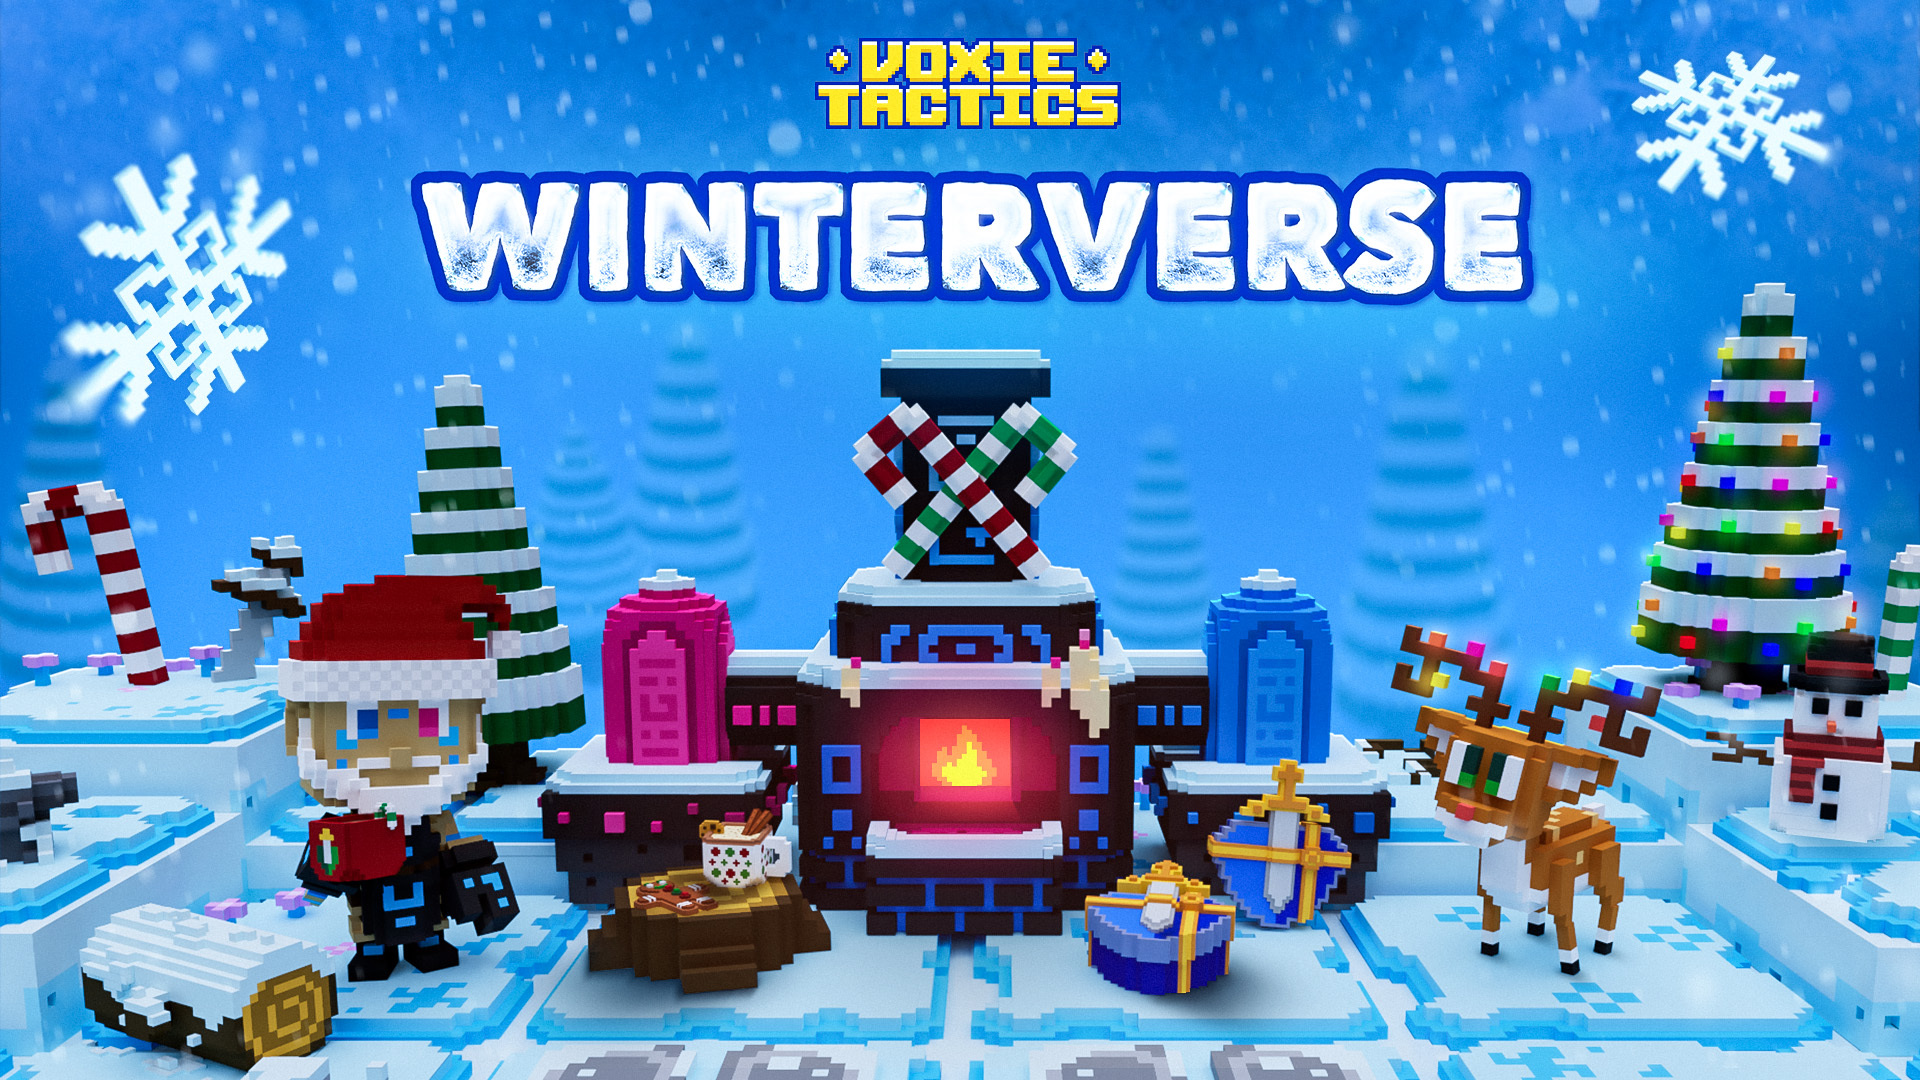 The WinterVerse arrived at Voxie Tactics